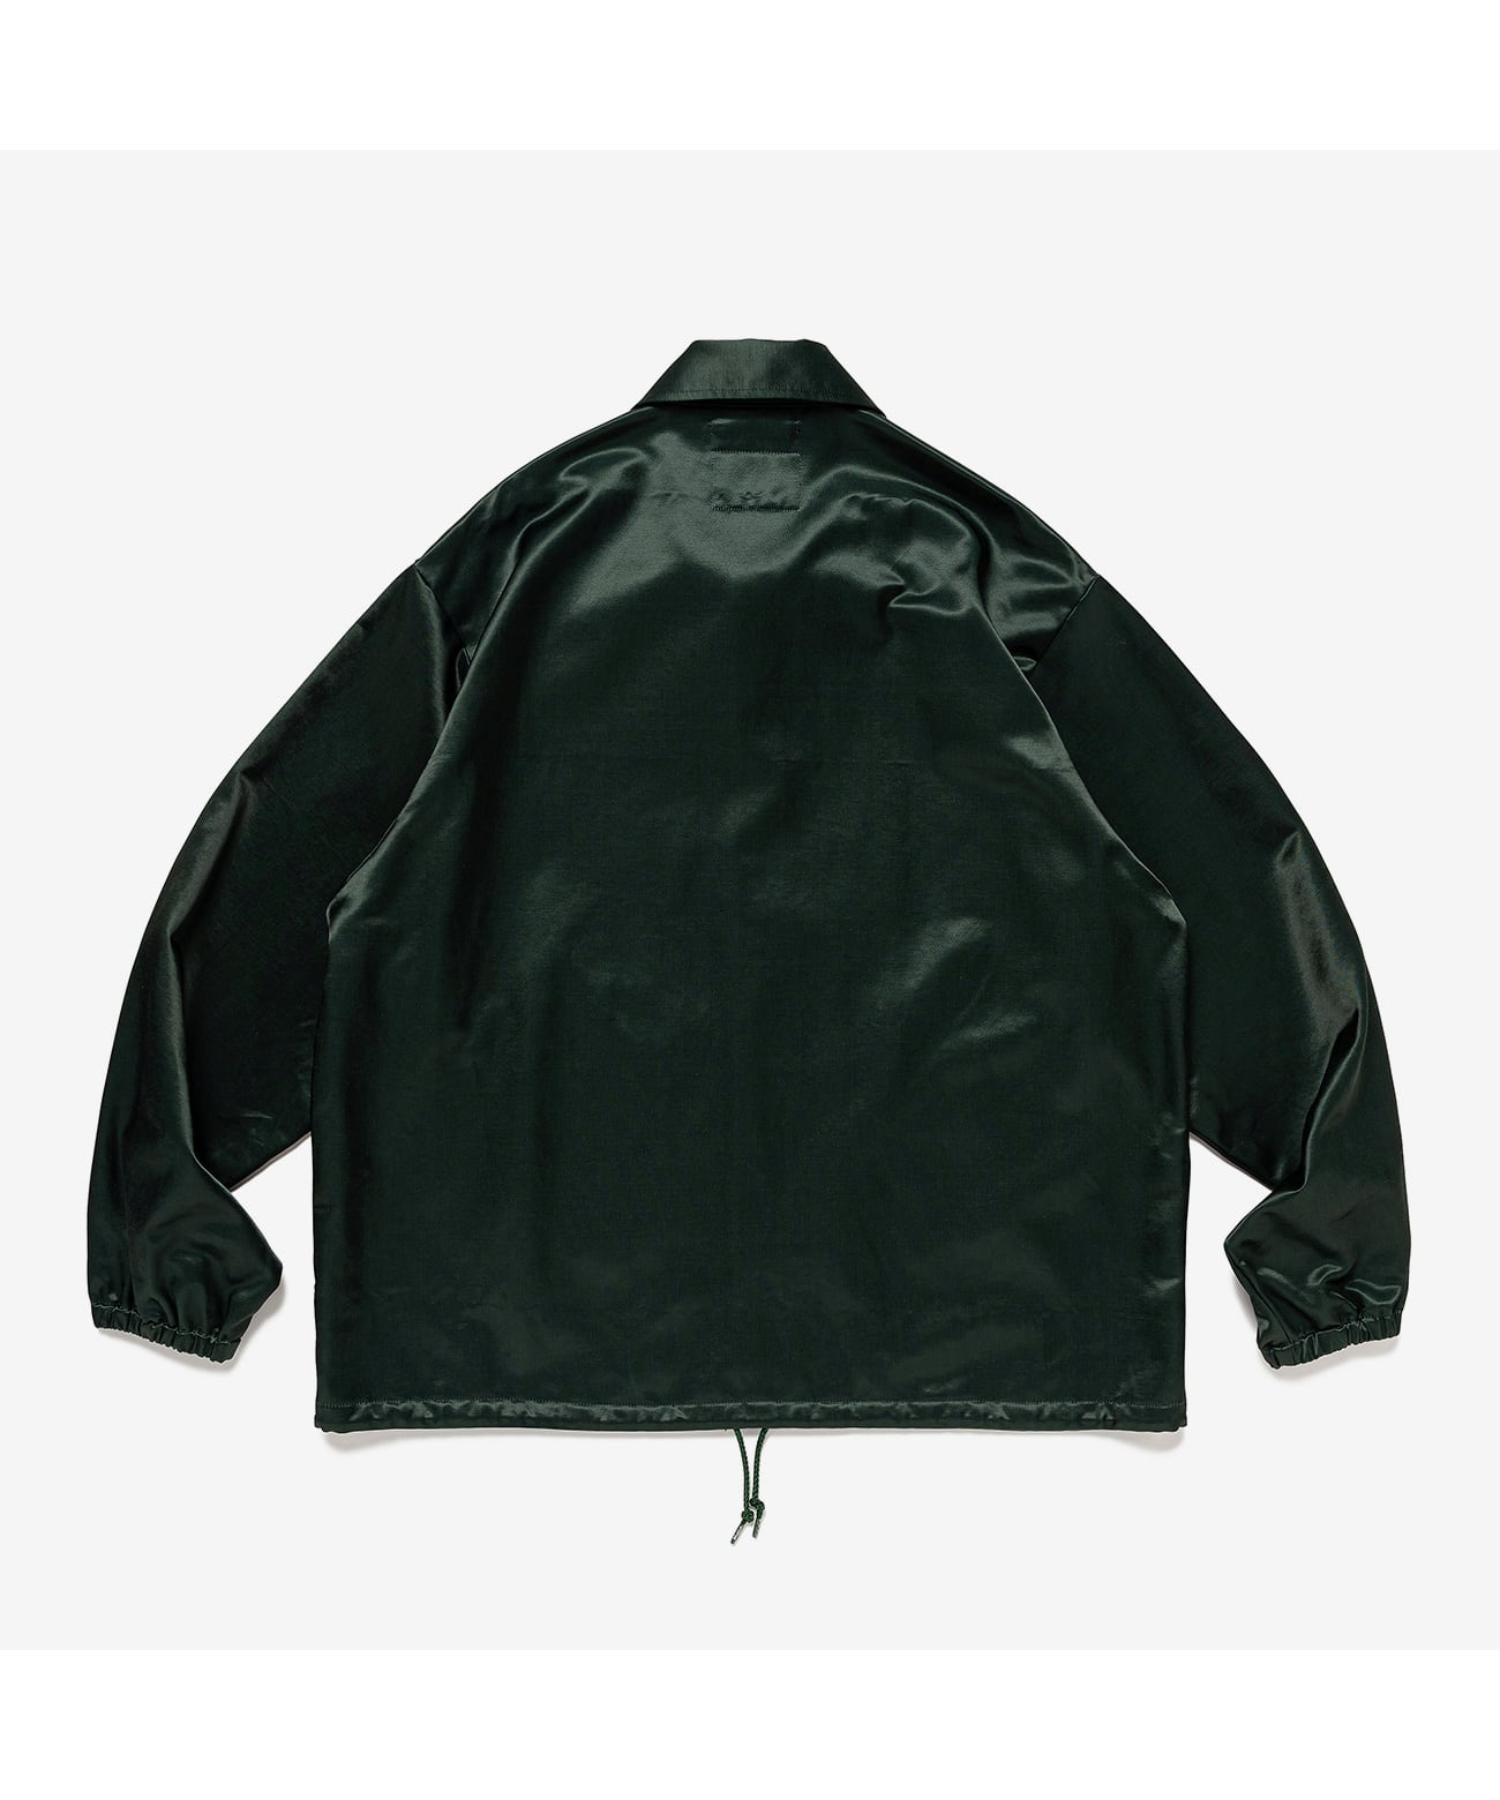 Wtaps Chief Jacket League  size M検討させて頂きます